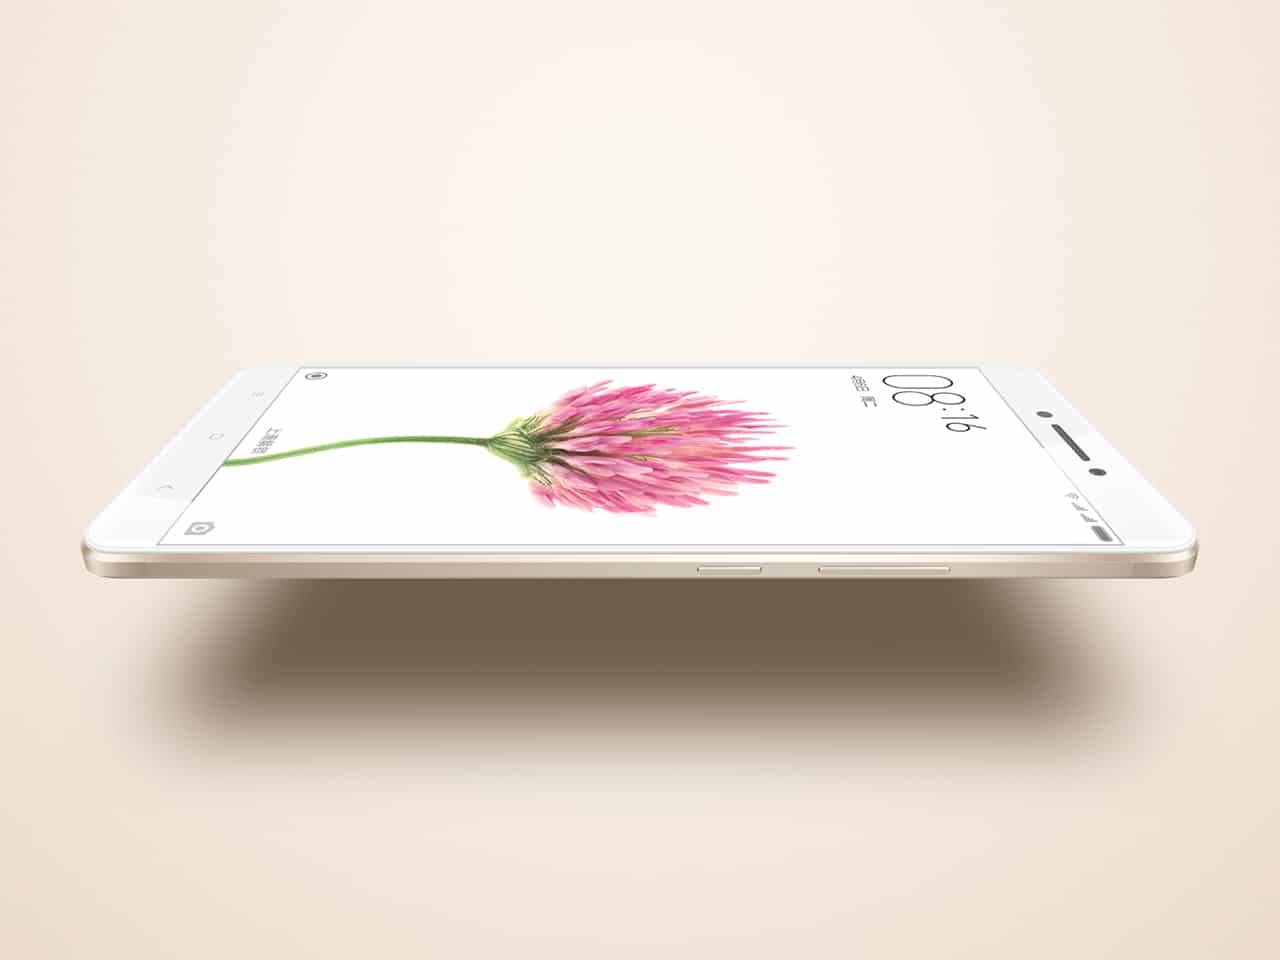 Xiaomi Mi Max with 6.44 inches display and 4,850 mAh battery